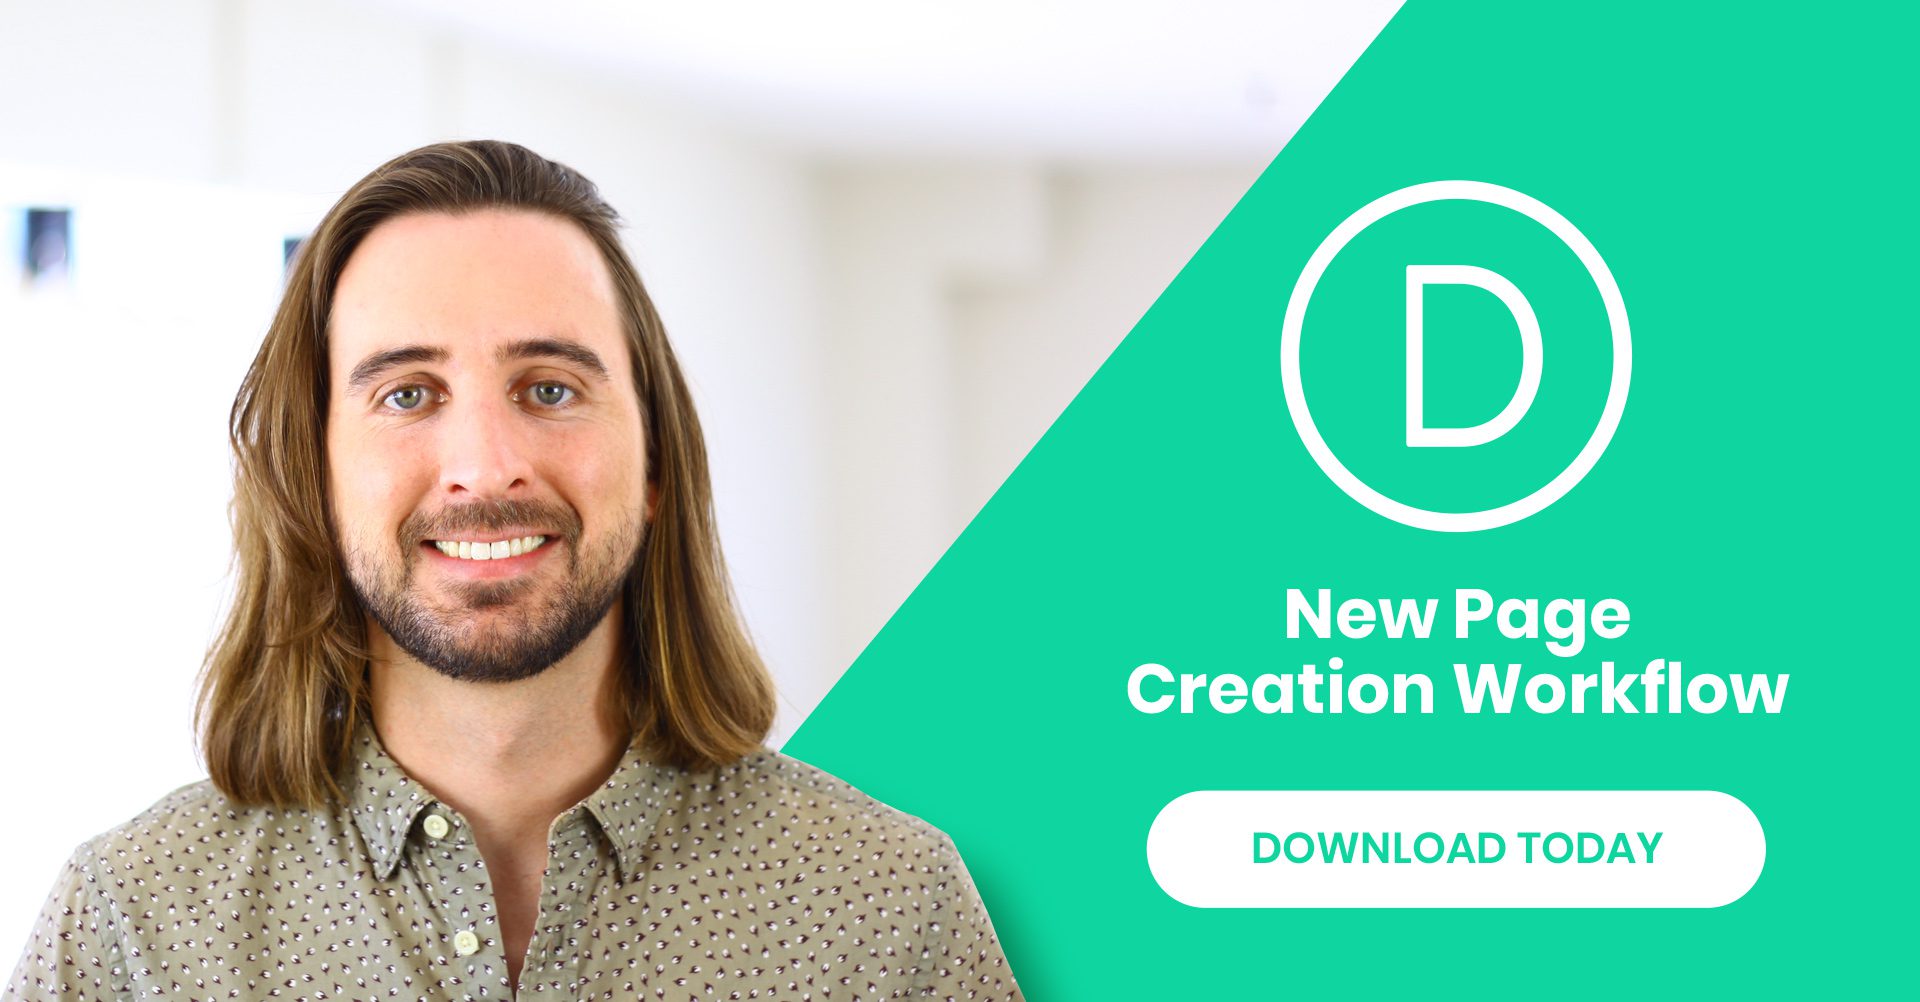 Divi Feature Update! The New Divi Builder Page Creation Workflow